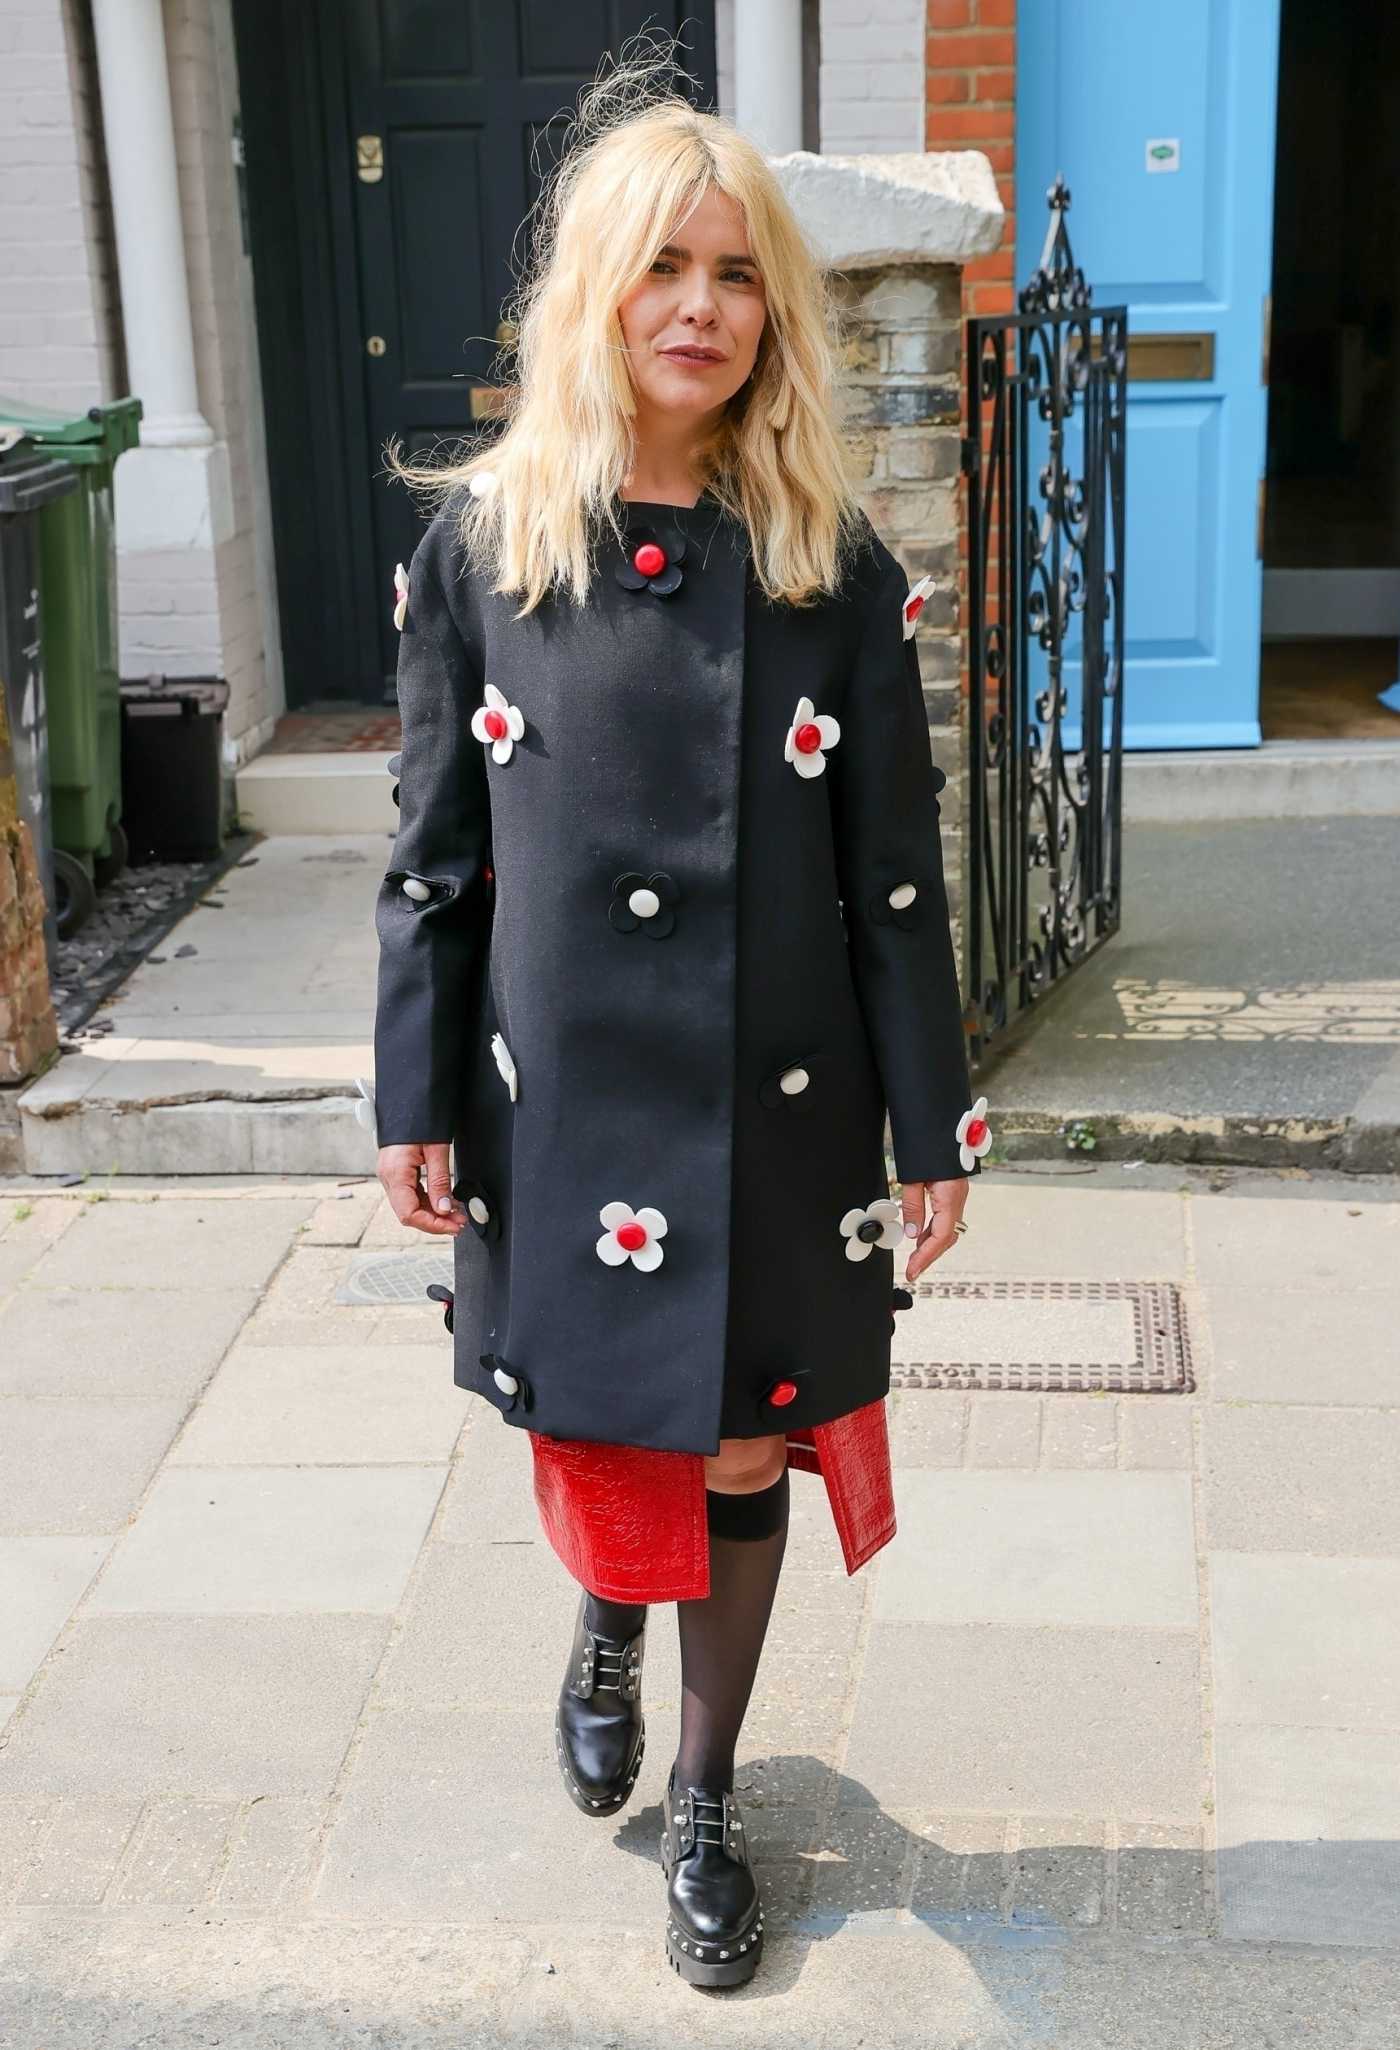 Paloma Faith in a Black Flowery Coat Arrives at Saturday Kitchen TV in London 04/23/2022